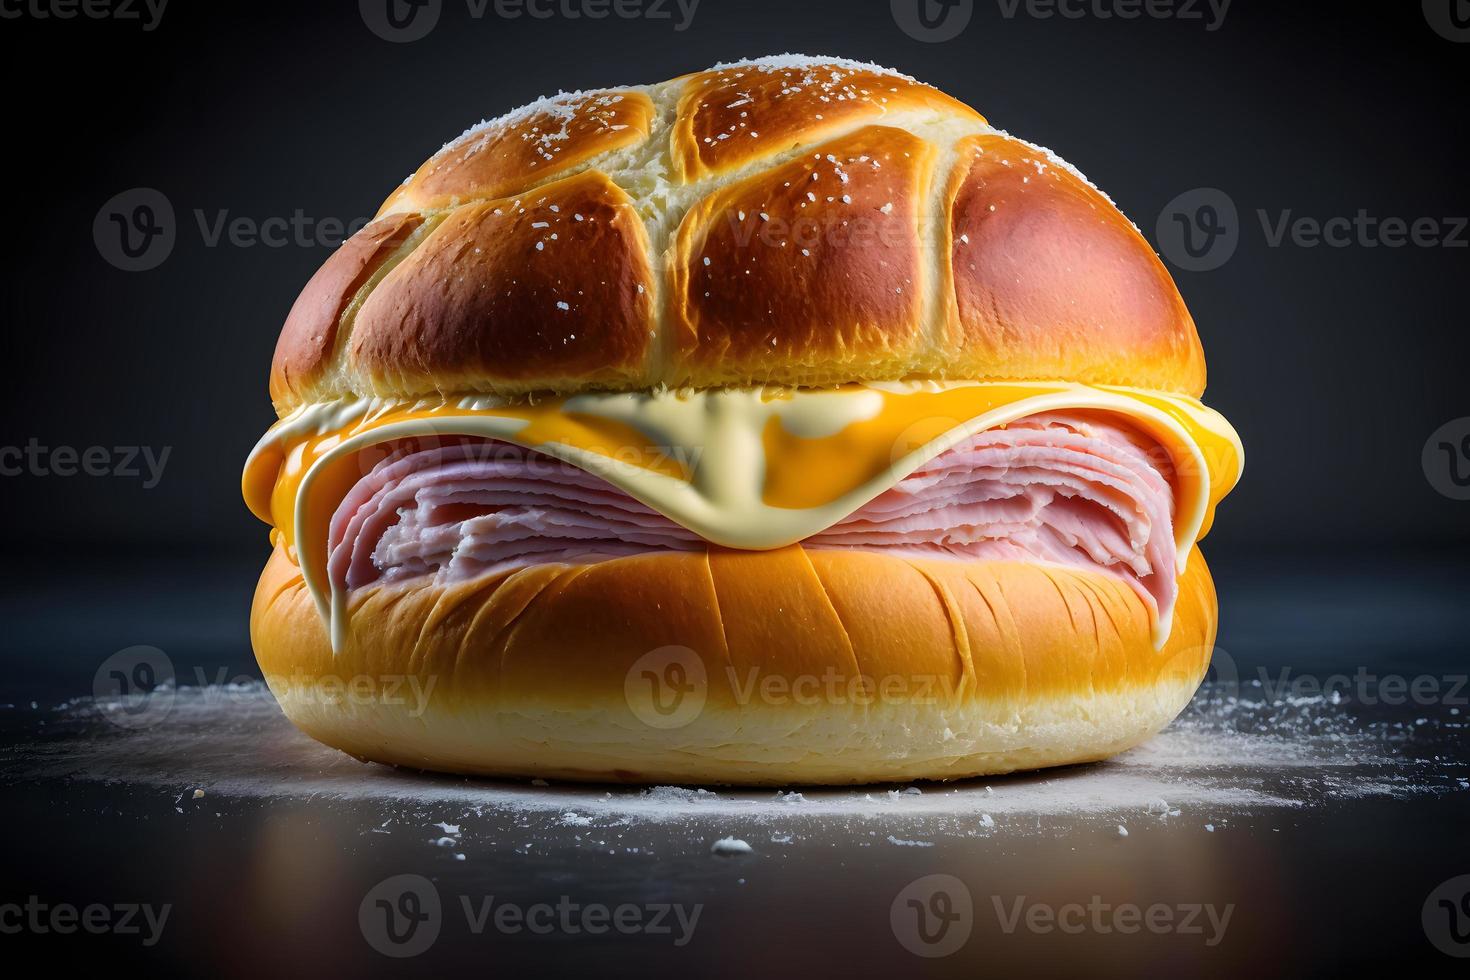 Homemade bun made of cheese and ham for breakfast food photography photo